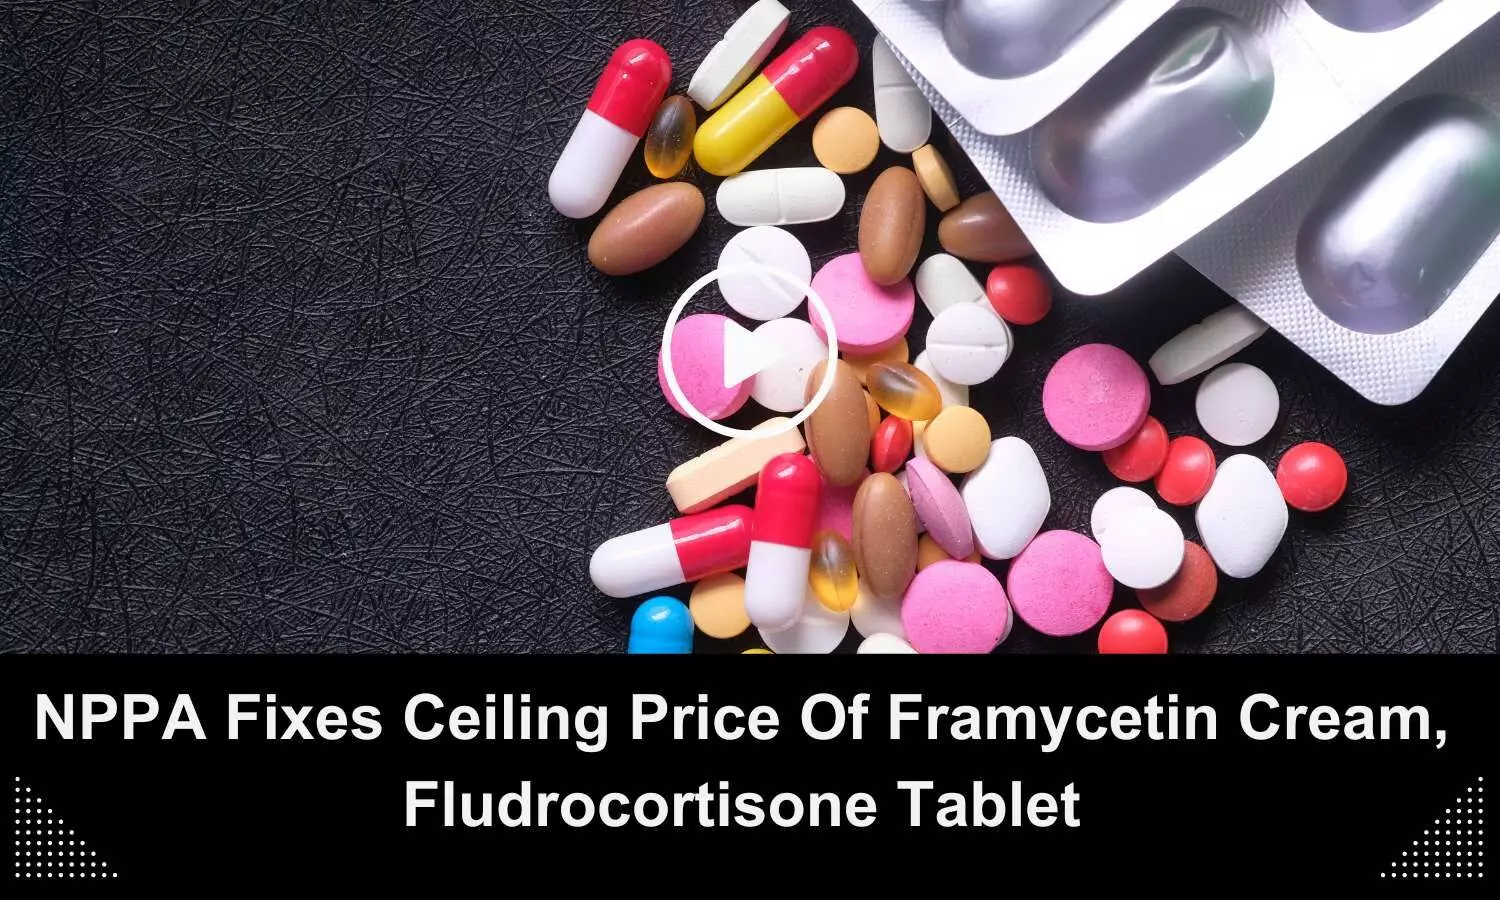 Ceiling price of Framycetin cream, Fludrocortisone tablet fixed by NPPA